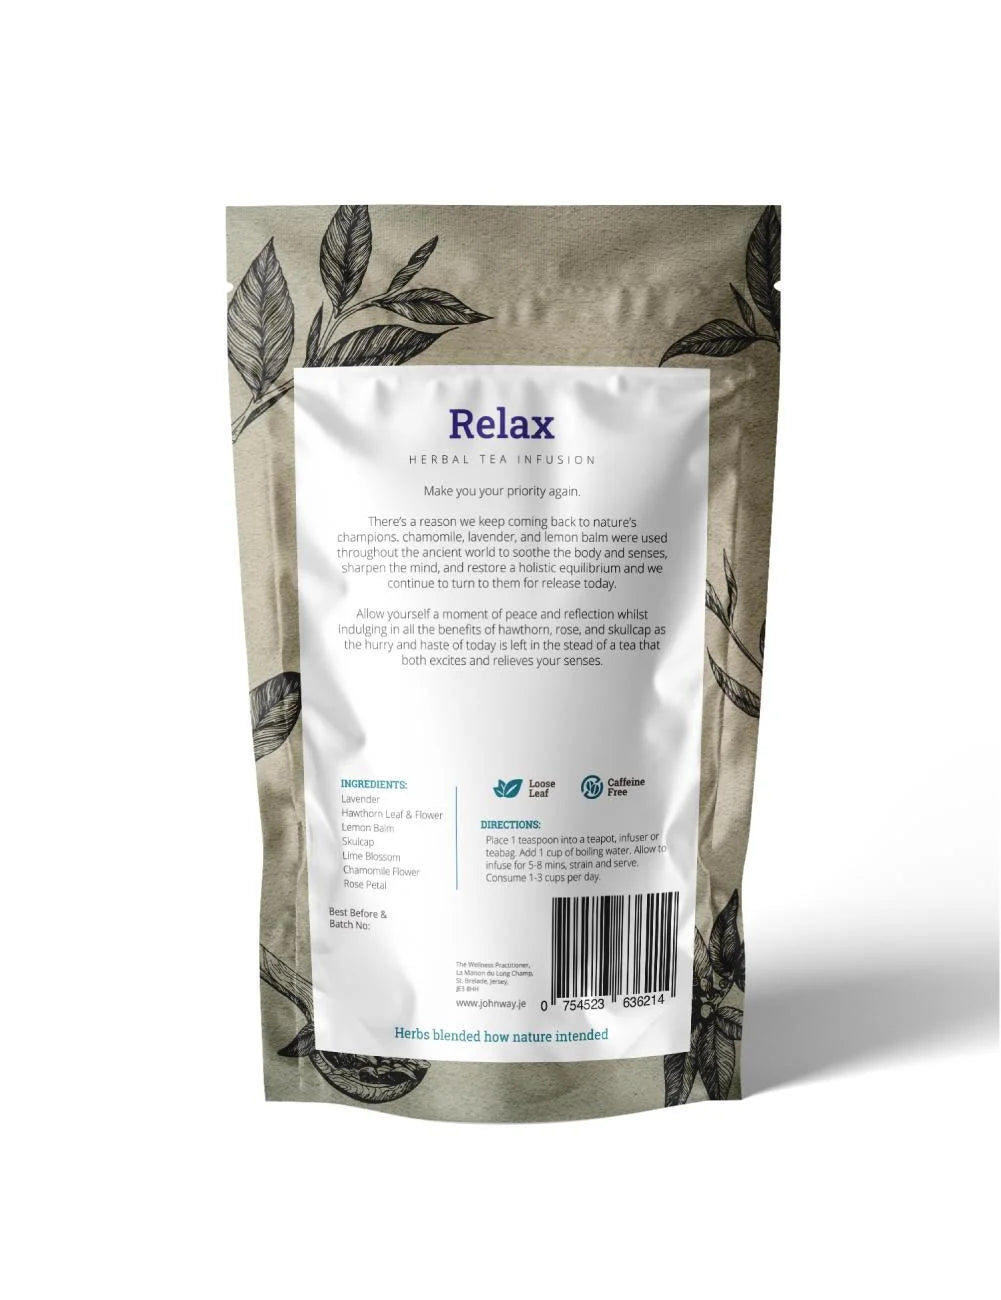 RELAX HERBAL TEA INFUSION (LOOSE LEAF) – The Wellness Practitioner